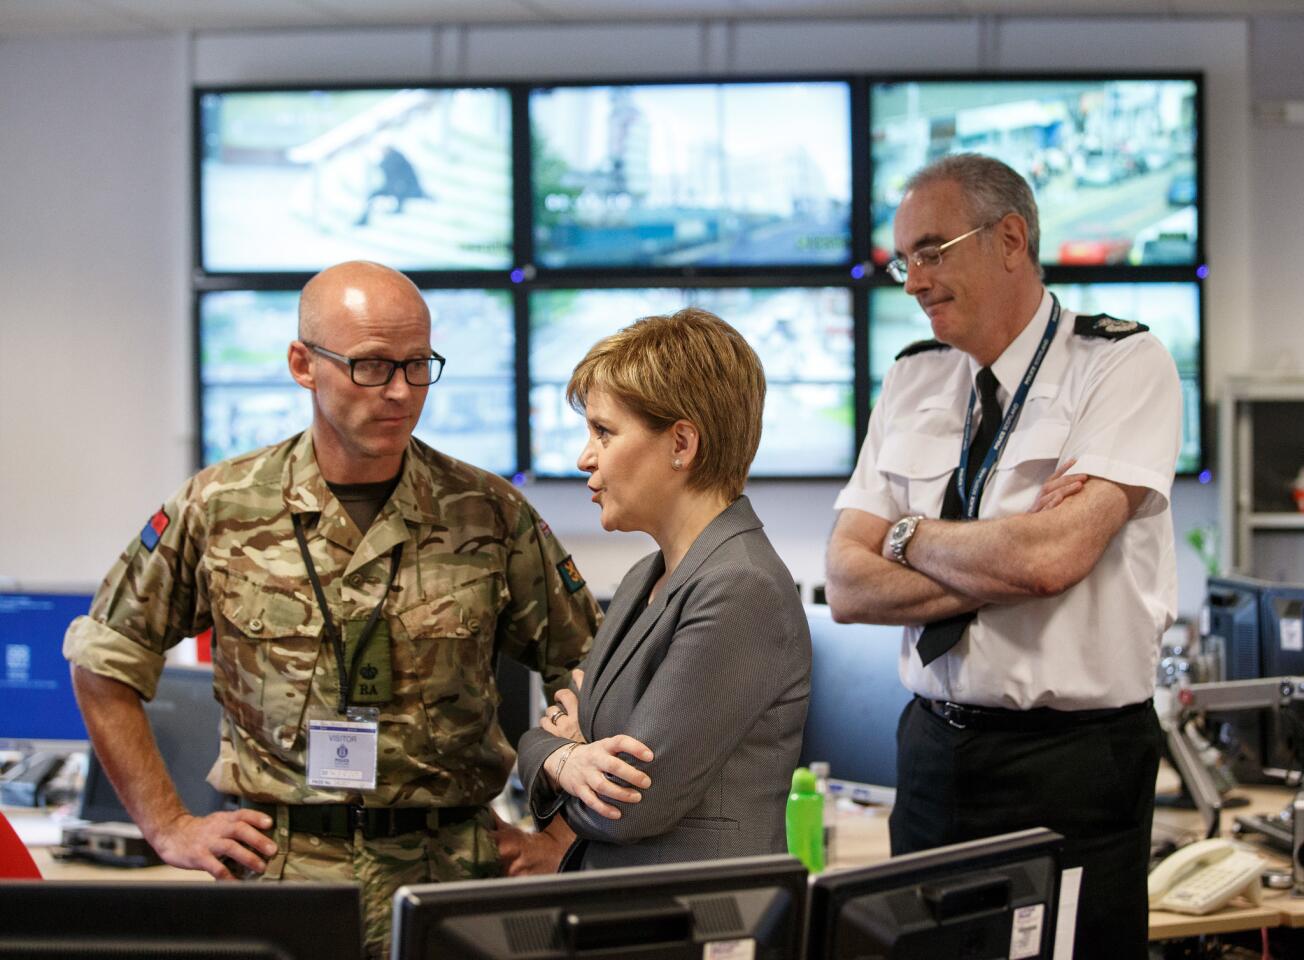 Scottish First Minister Nicola Sturgeon meets with police authorities on May 24, 2017, in Glasgow. Security measures across the United Kingdom have been stepped up after the nation's terror threat level was raised to "critical" in the wake of the Manchester bombing.